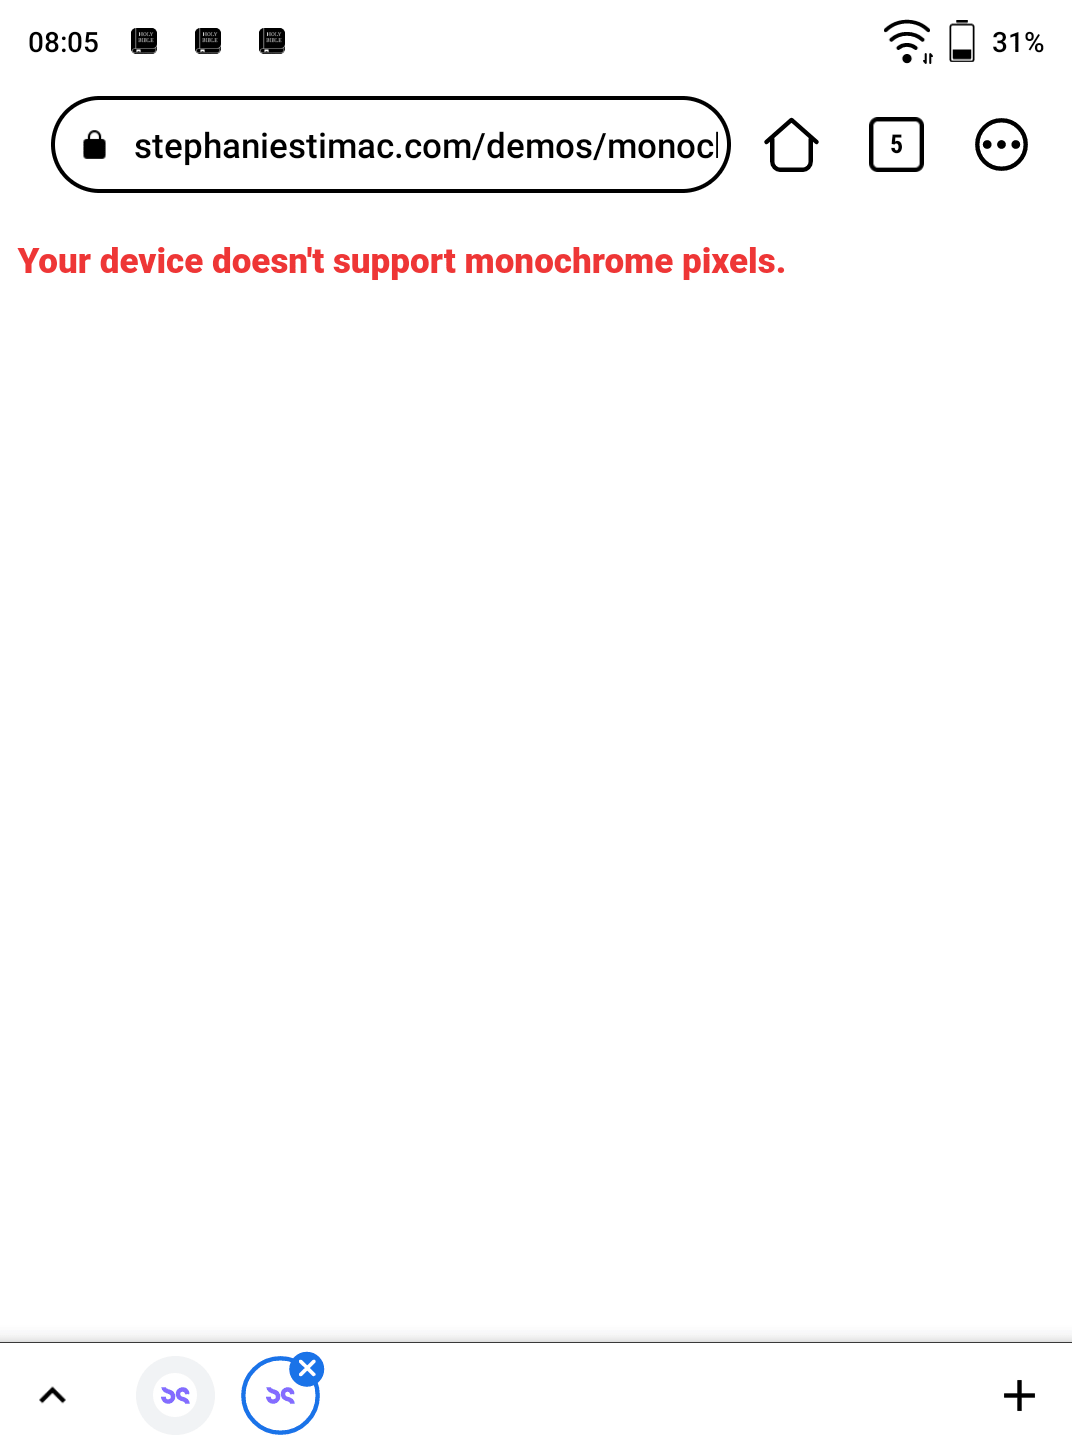 A color screenshot of the device’s interface with a webpage saying ‘Your device doesn’t support monochrome pixels’ in red